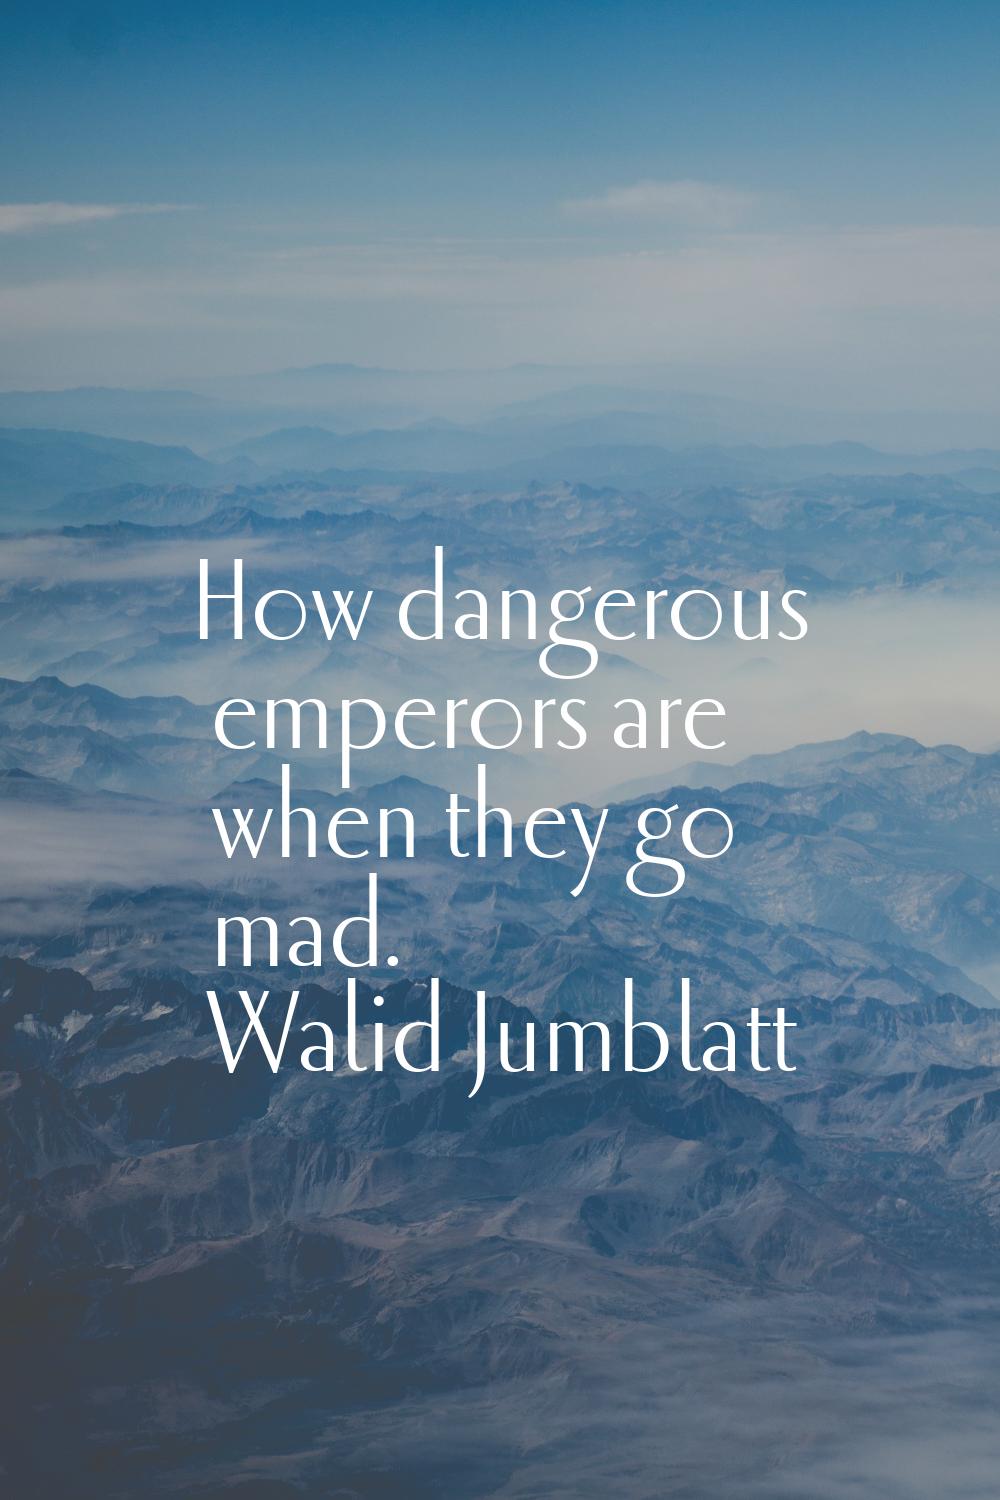 How dangerous emperors are when they go mad.